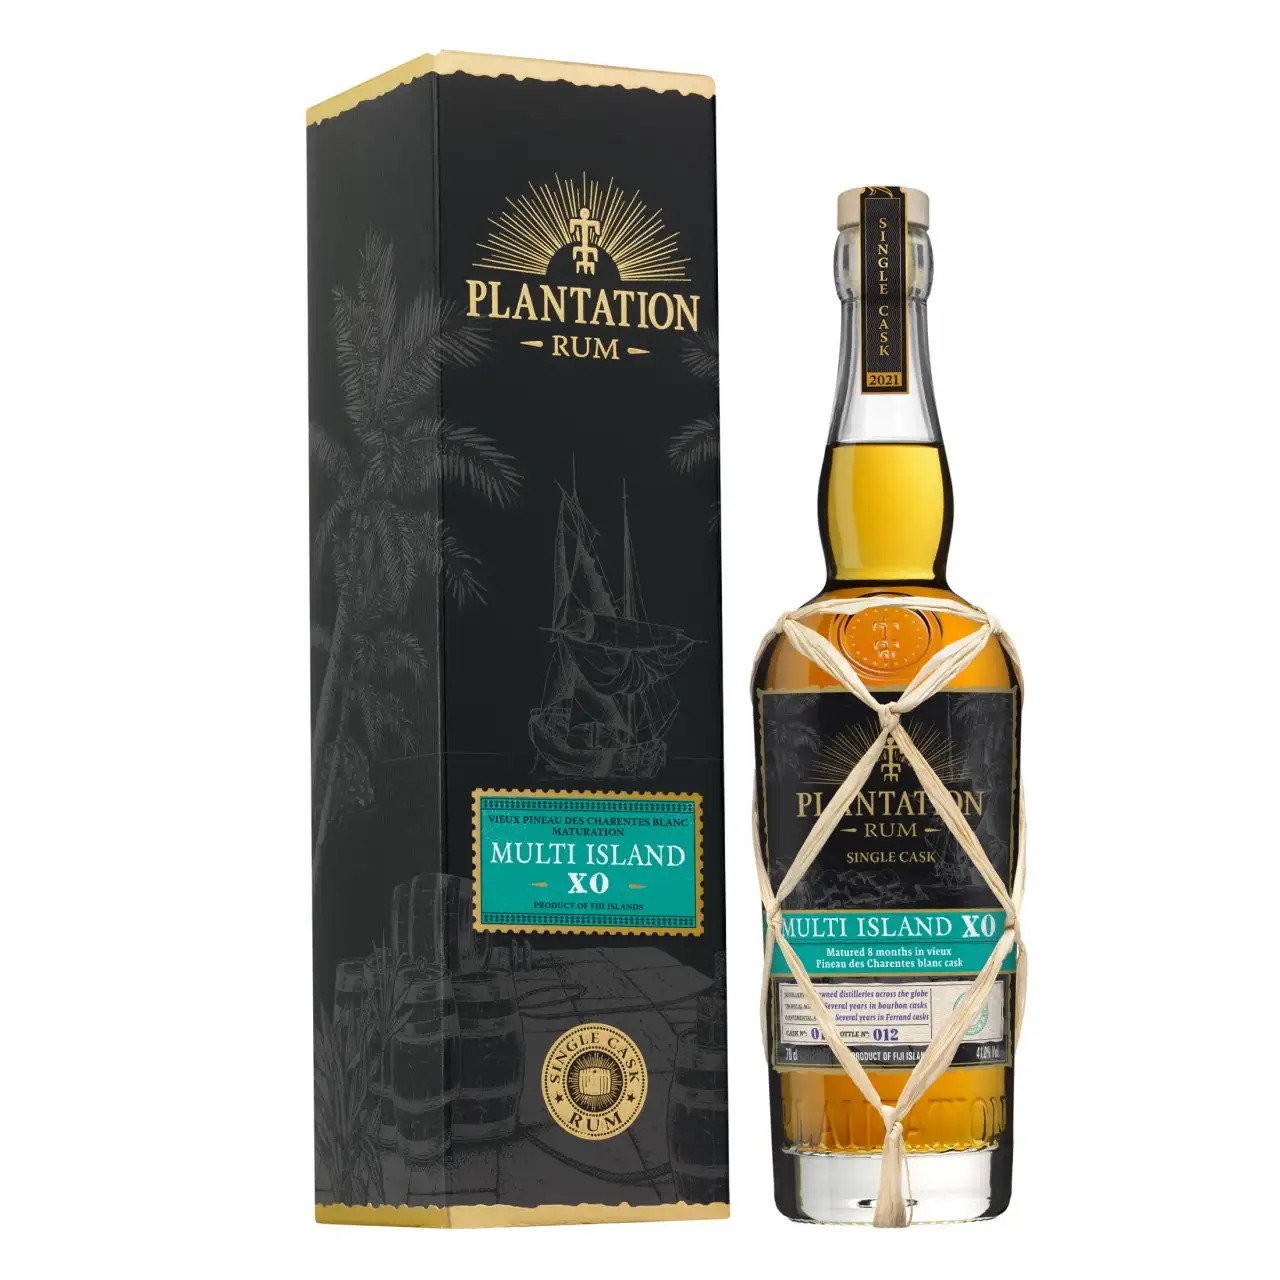 Image of the front of the bottle of the rum Plantation Multi Island Extra Old XO (Vieux Pineau des Charentes)